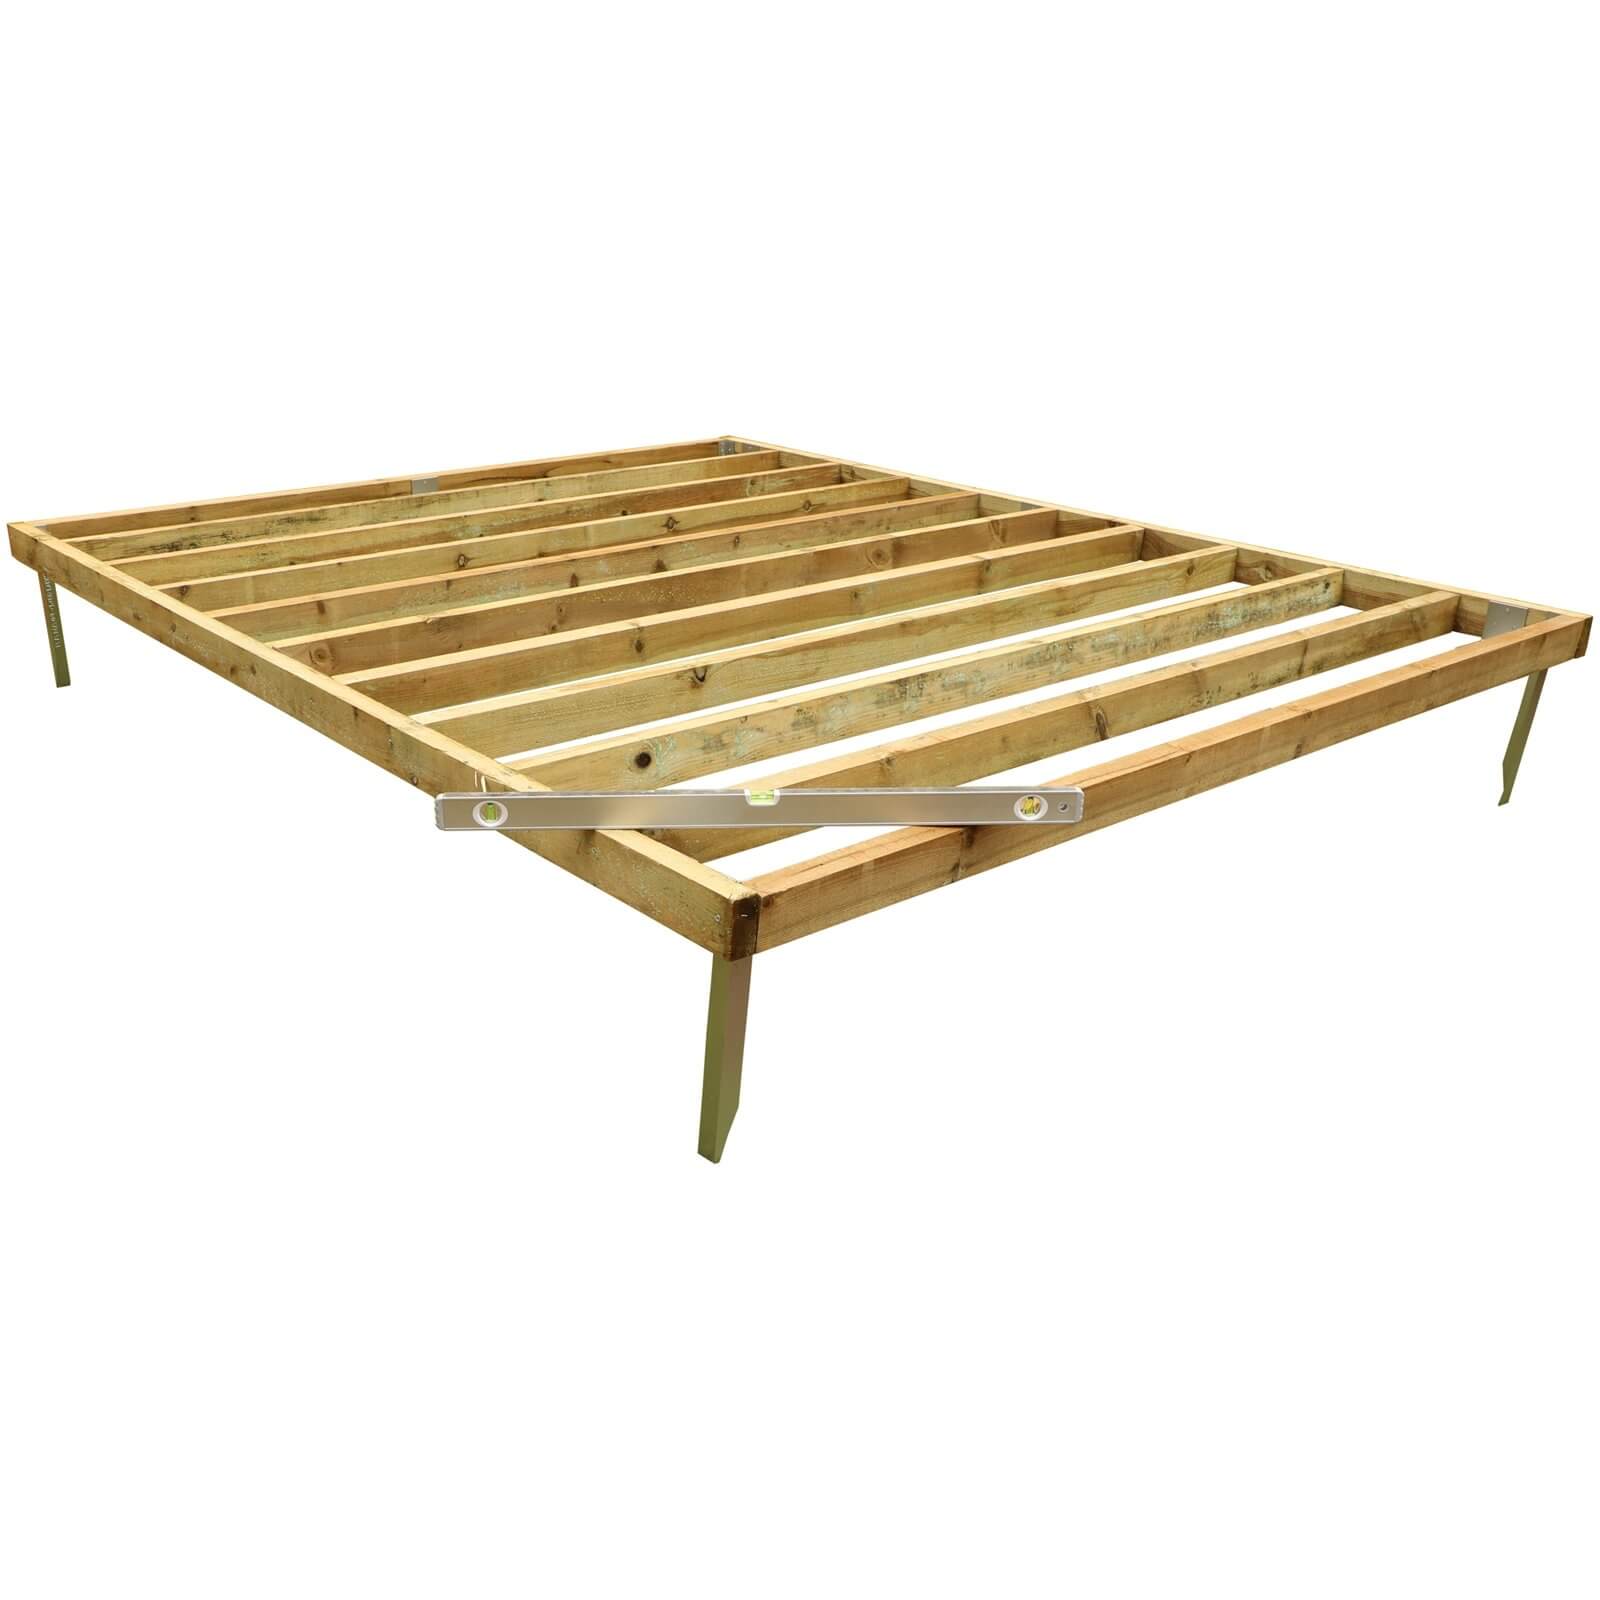 Photo of Mercia 10x8ft Pressure Treated Wooden Shed Base